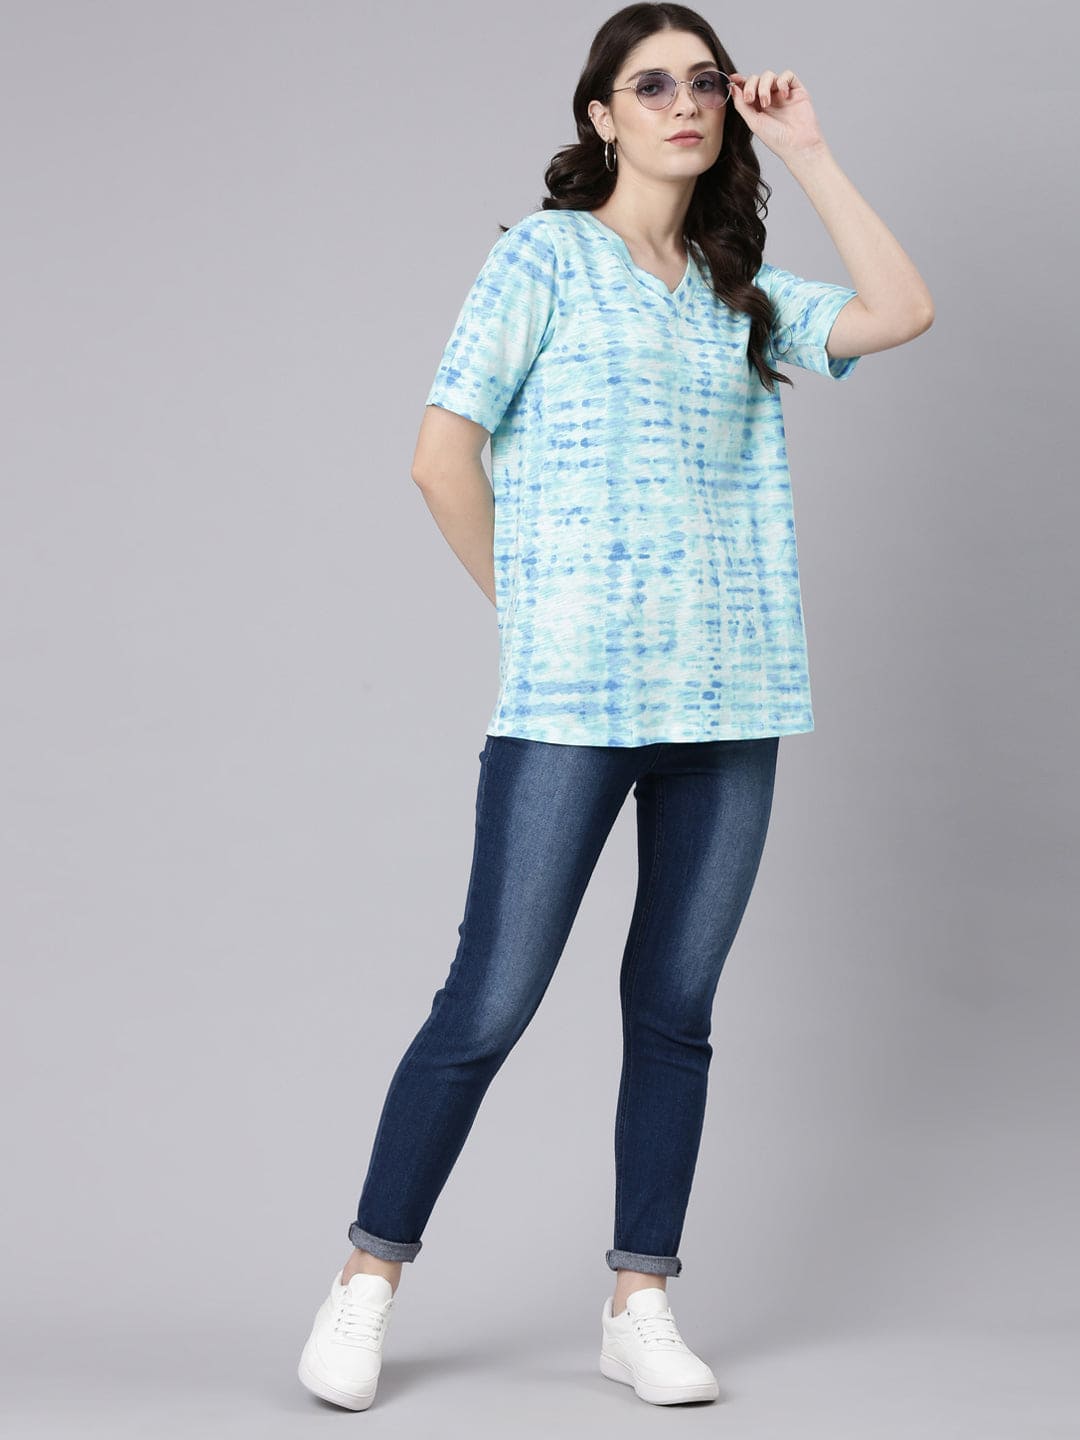 TheShaili Casual V Neck Top for Womens & Girls/Casual Top for Office College Work Casual Wear/White Blue